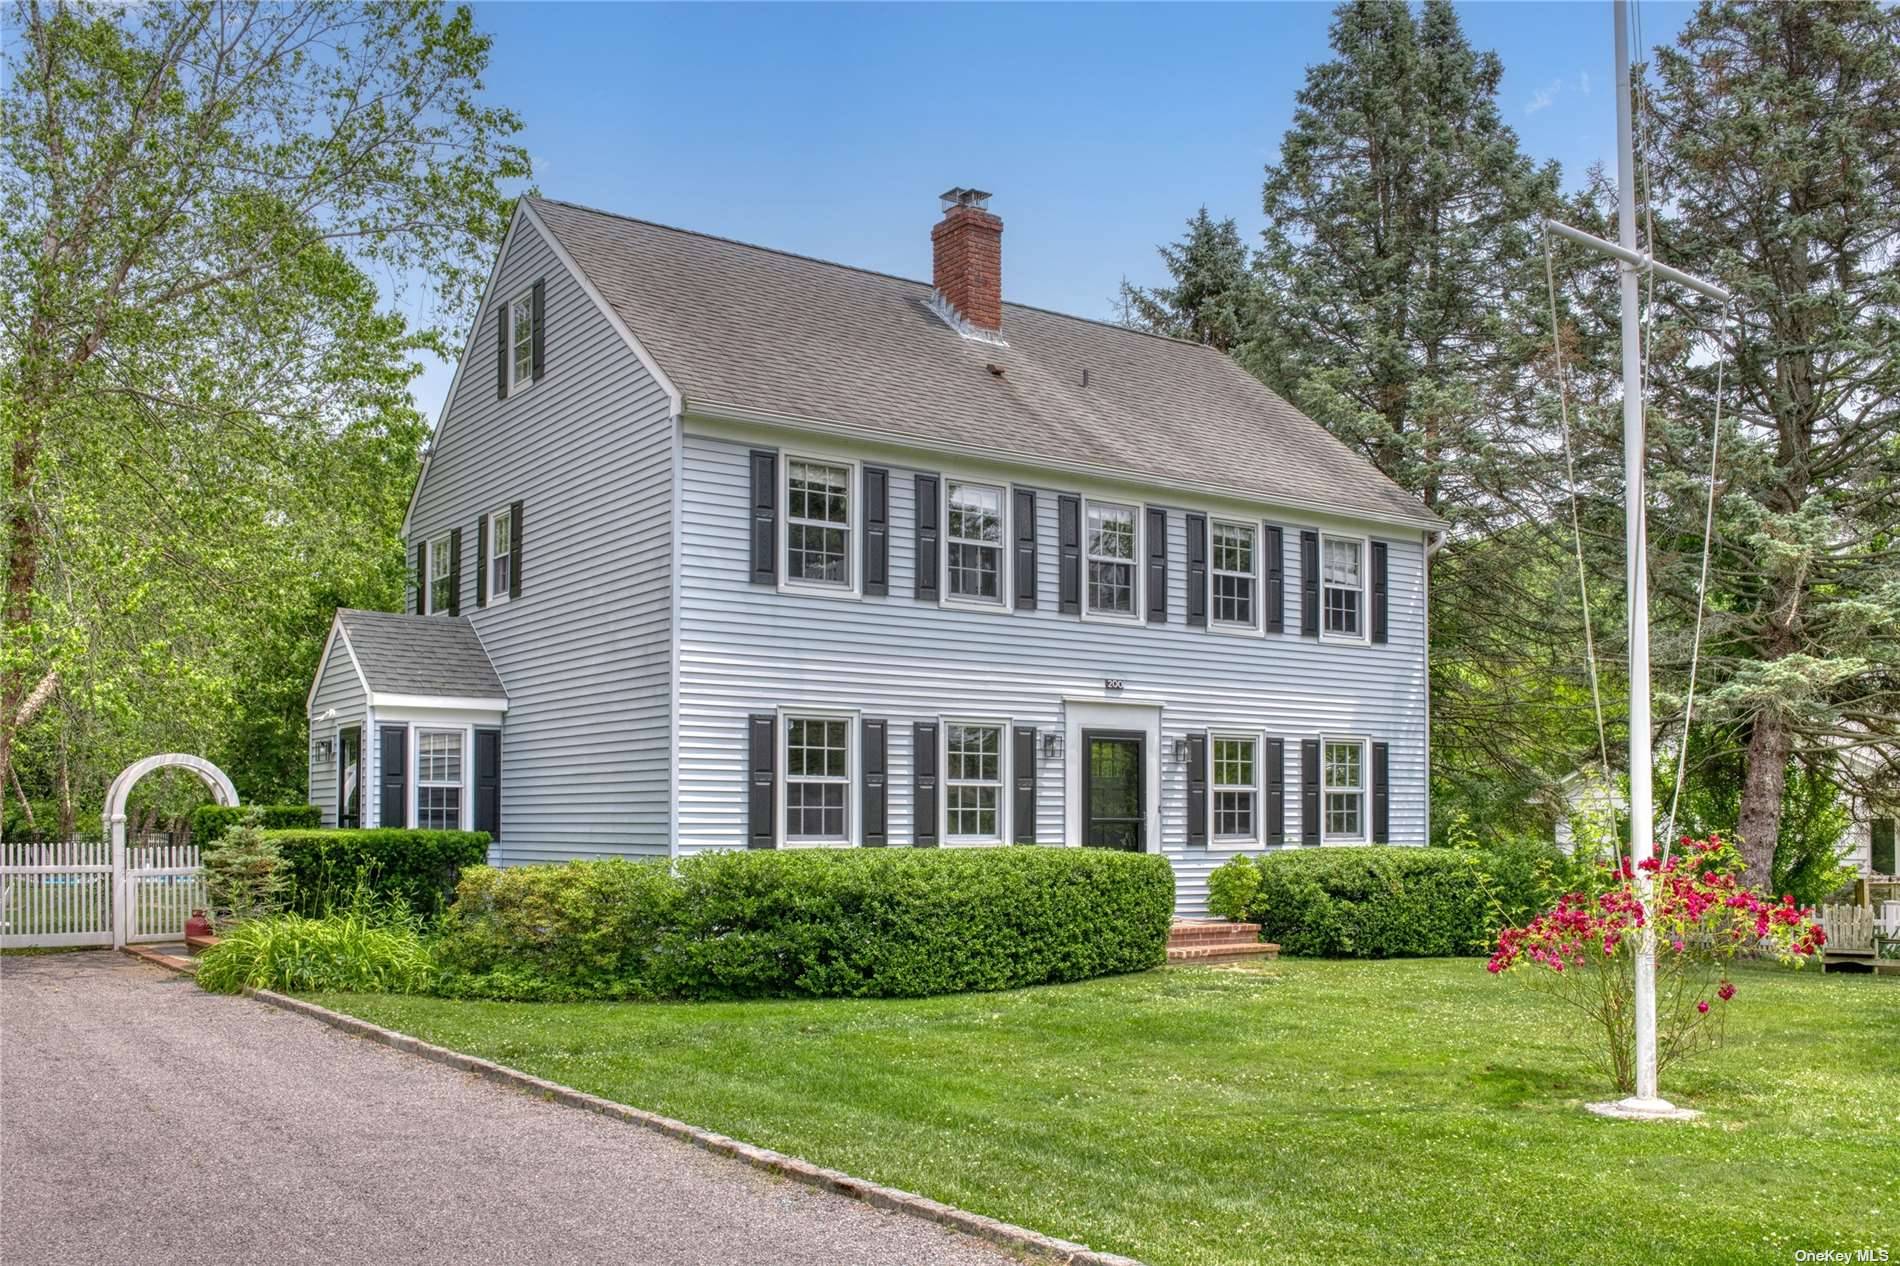 Stylish 4 bed 2. 5 bath colonial with heated saltwater in ground pool in the heart of Southold.